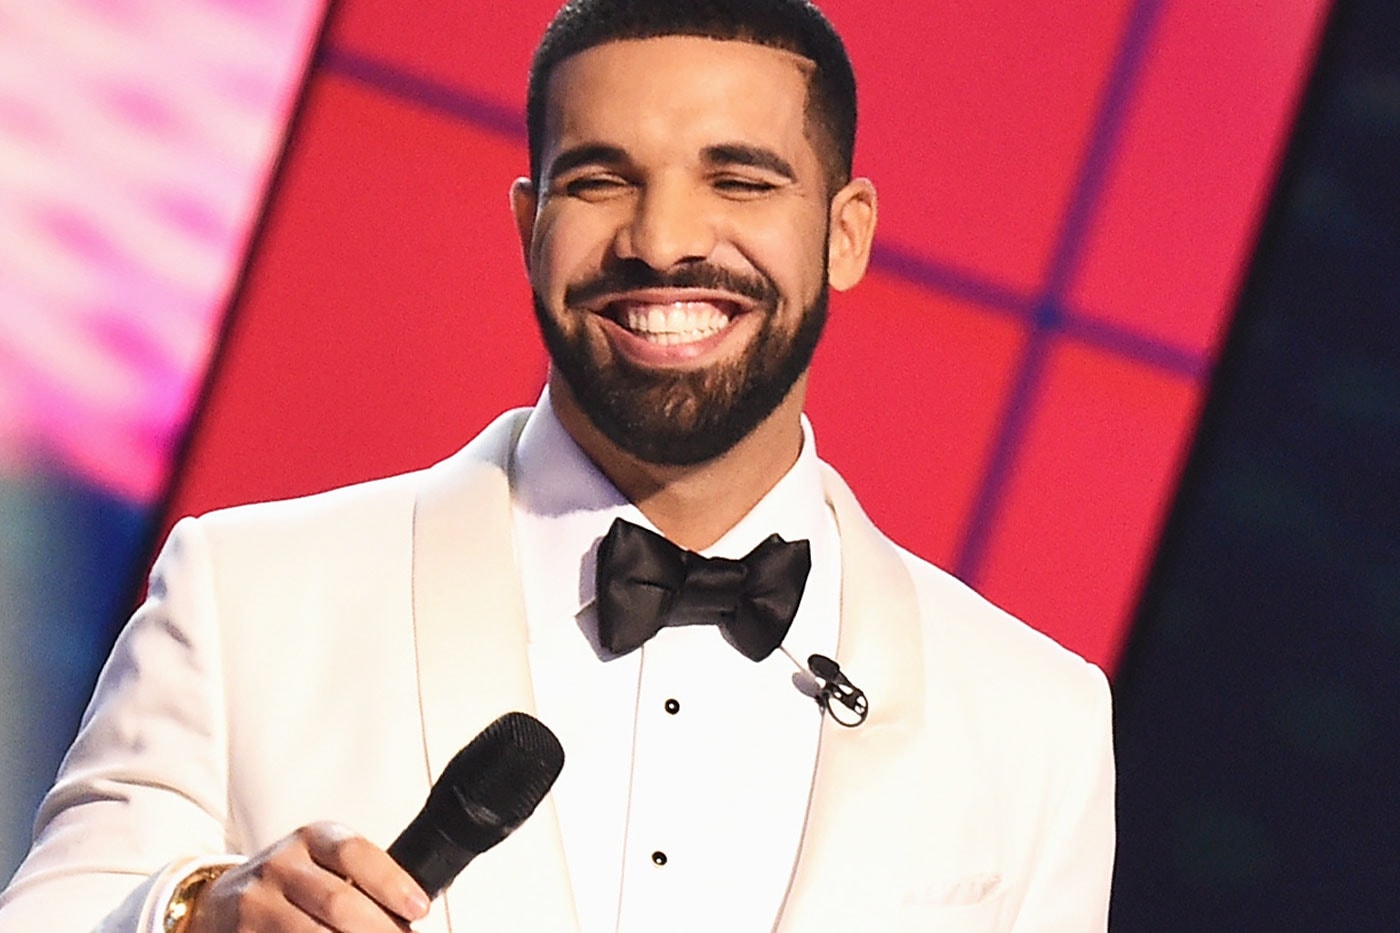 Drake's "Hotline Bling" Video Is Coming out Tomorrow